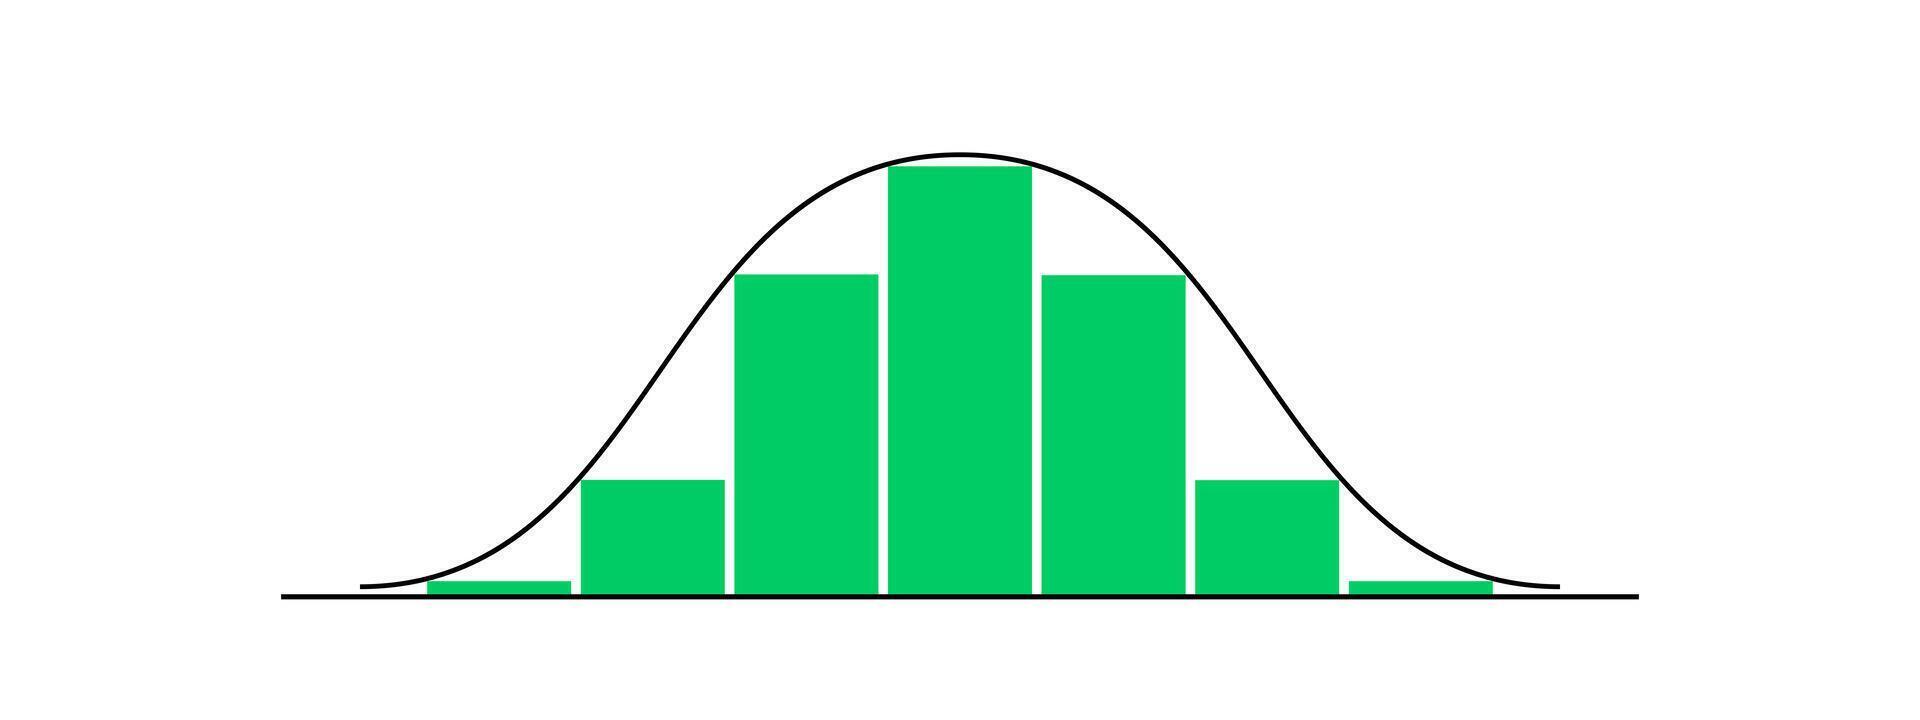 Bell shaped curve with different heights columns. Gaussian or normal distribution graph. Template for statistics or logistic data. Probability theory mathematical function. vector